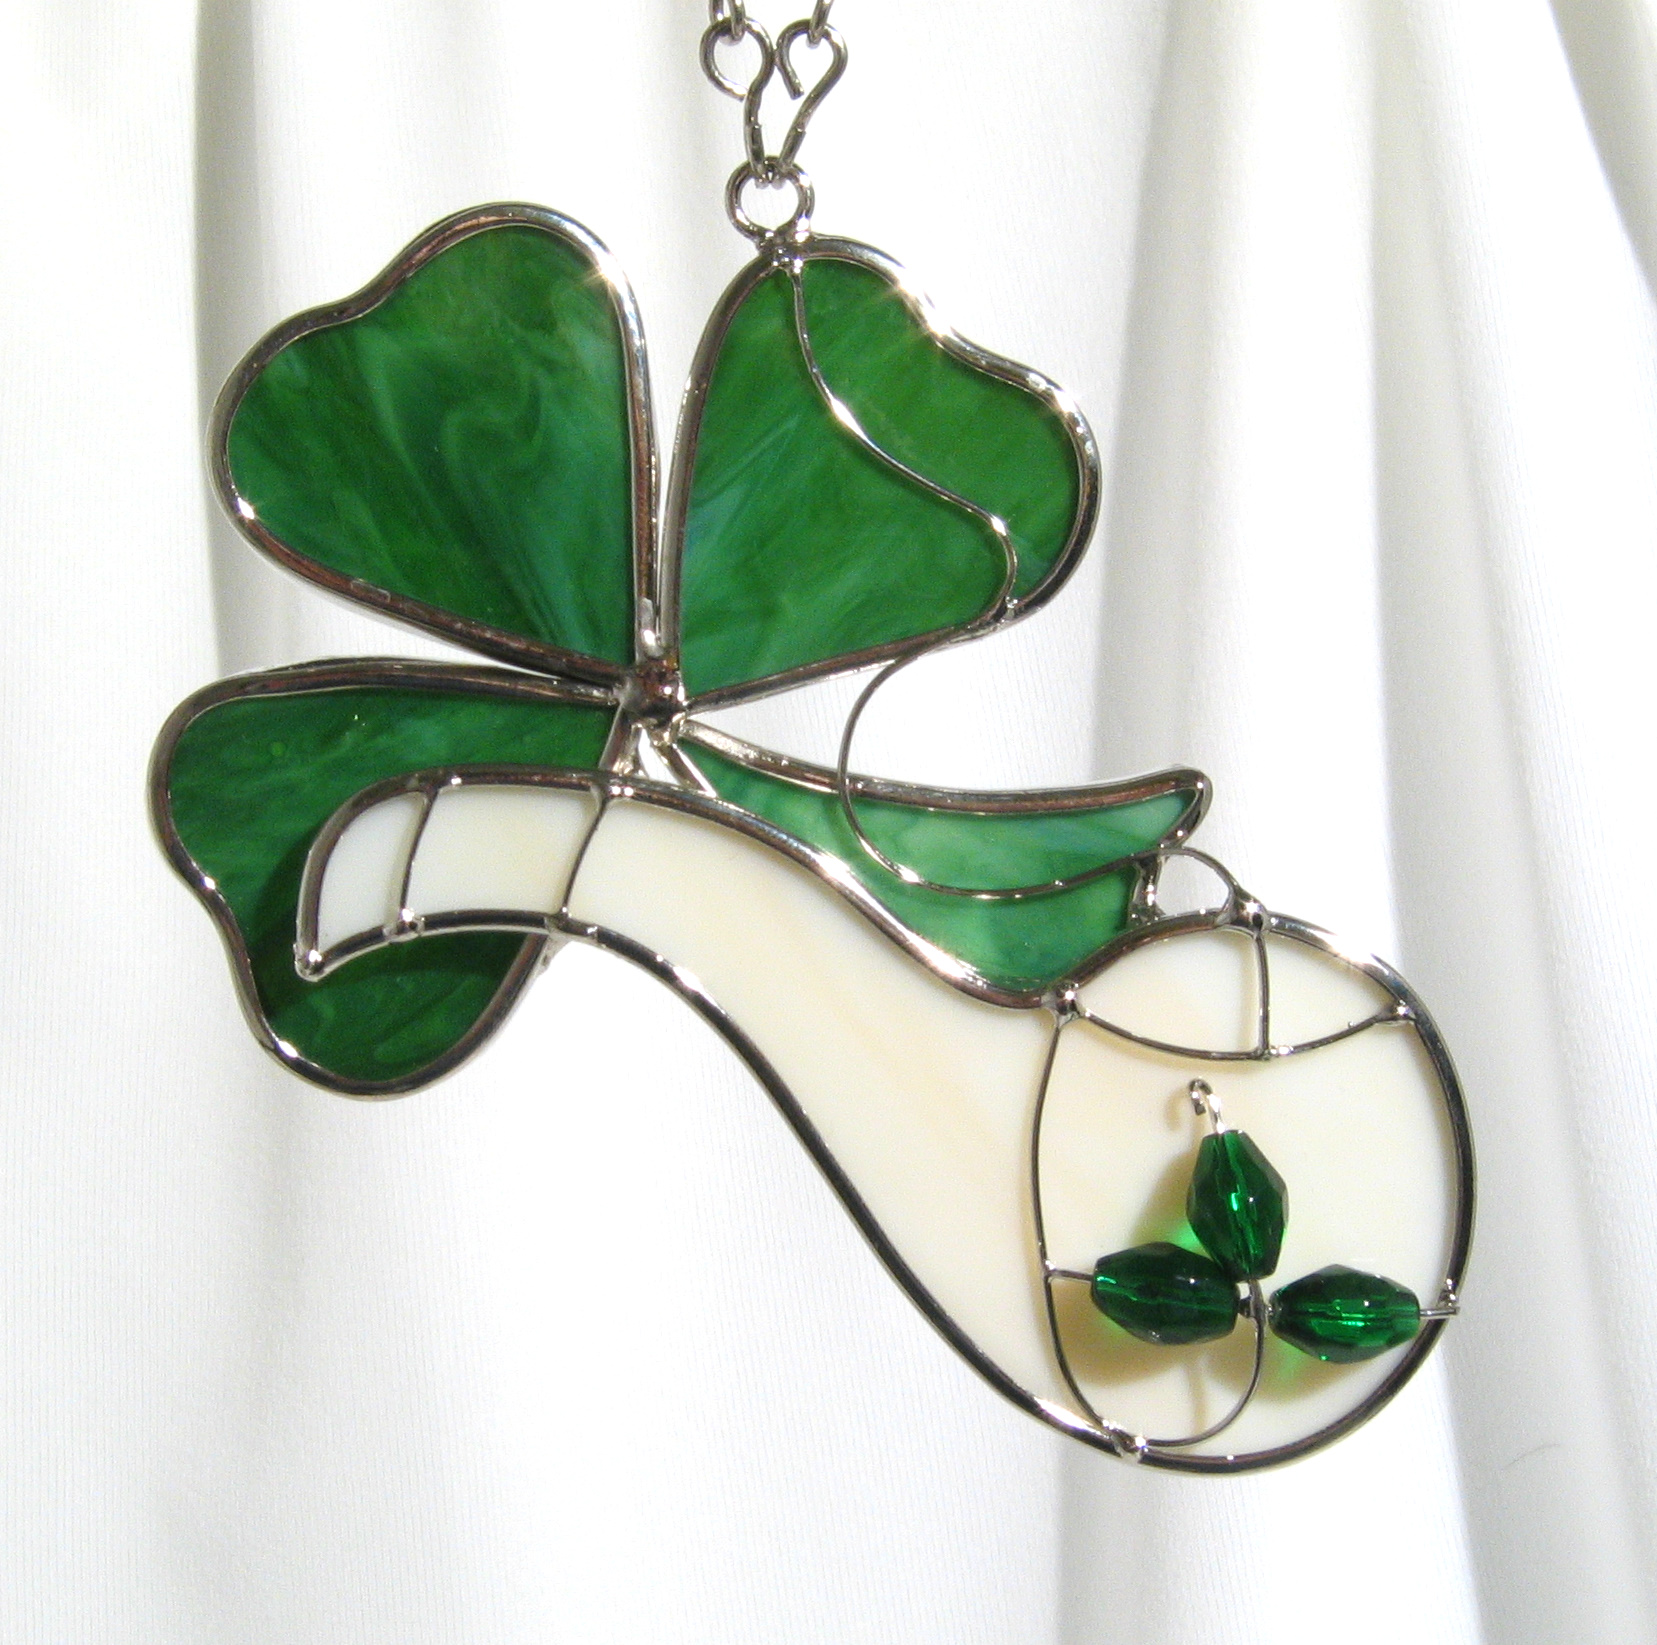 Shamrock and Pipe